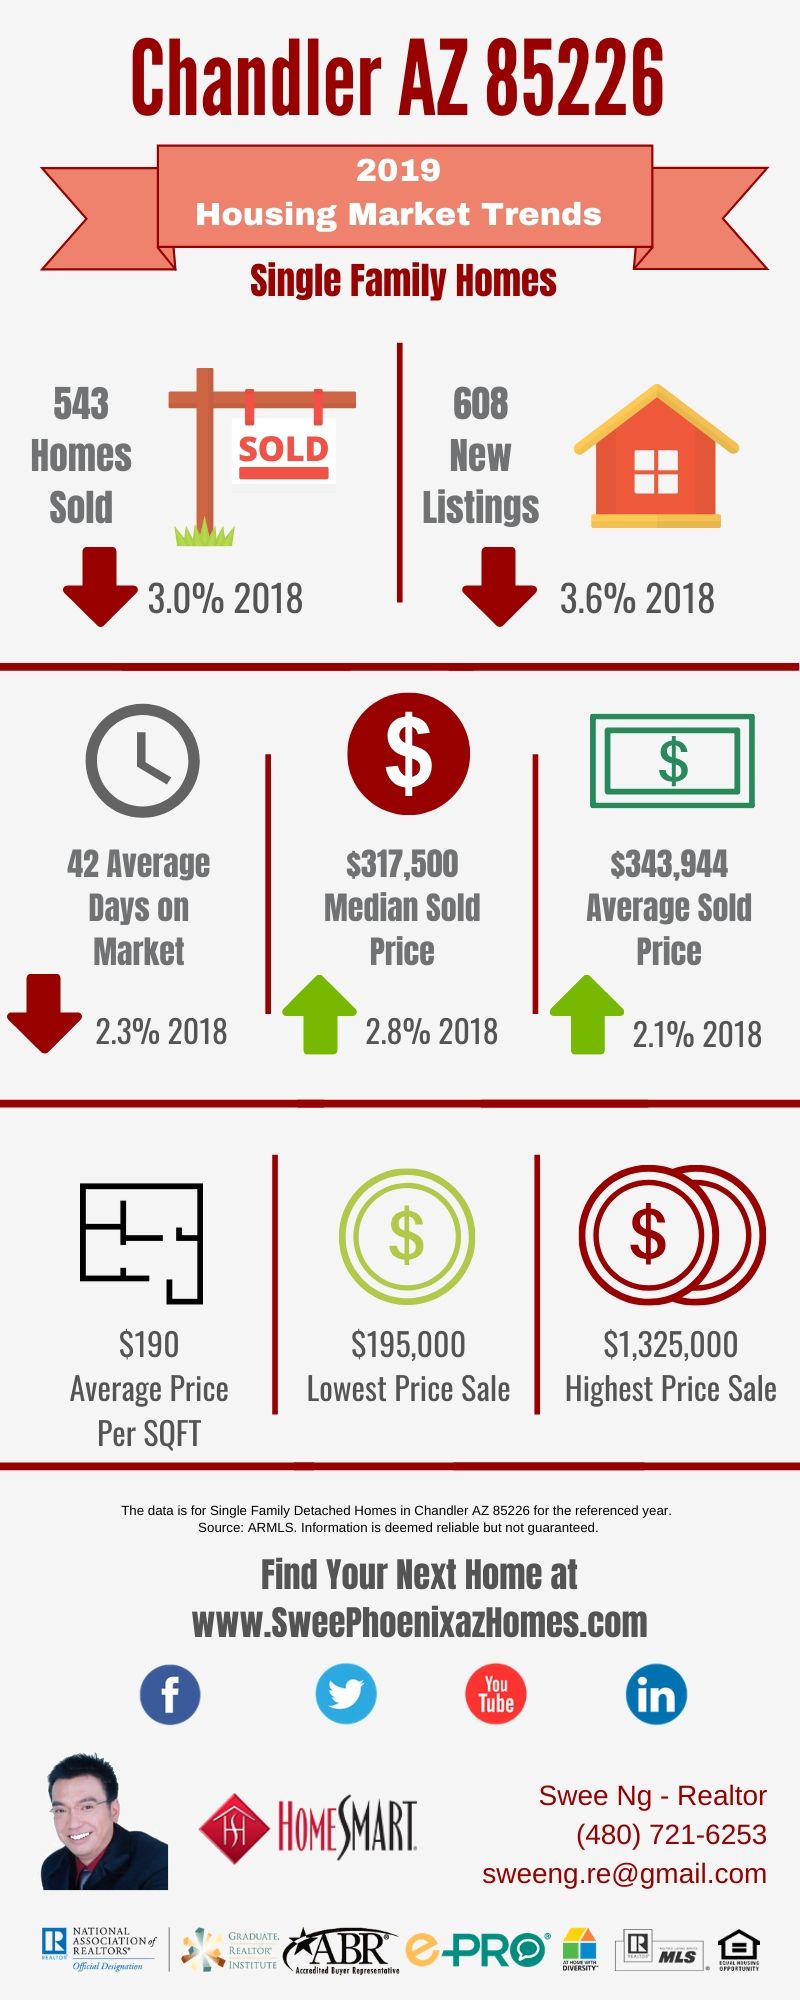 Chandler AZ 85226 Housing Market Trends Report 2019, House Value, Real Estate and Statistic by Swee Ng